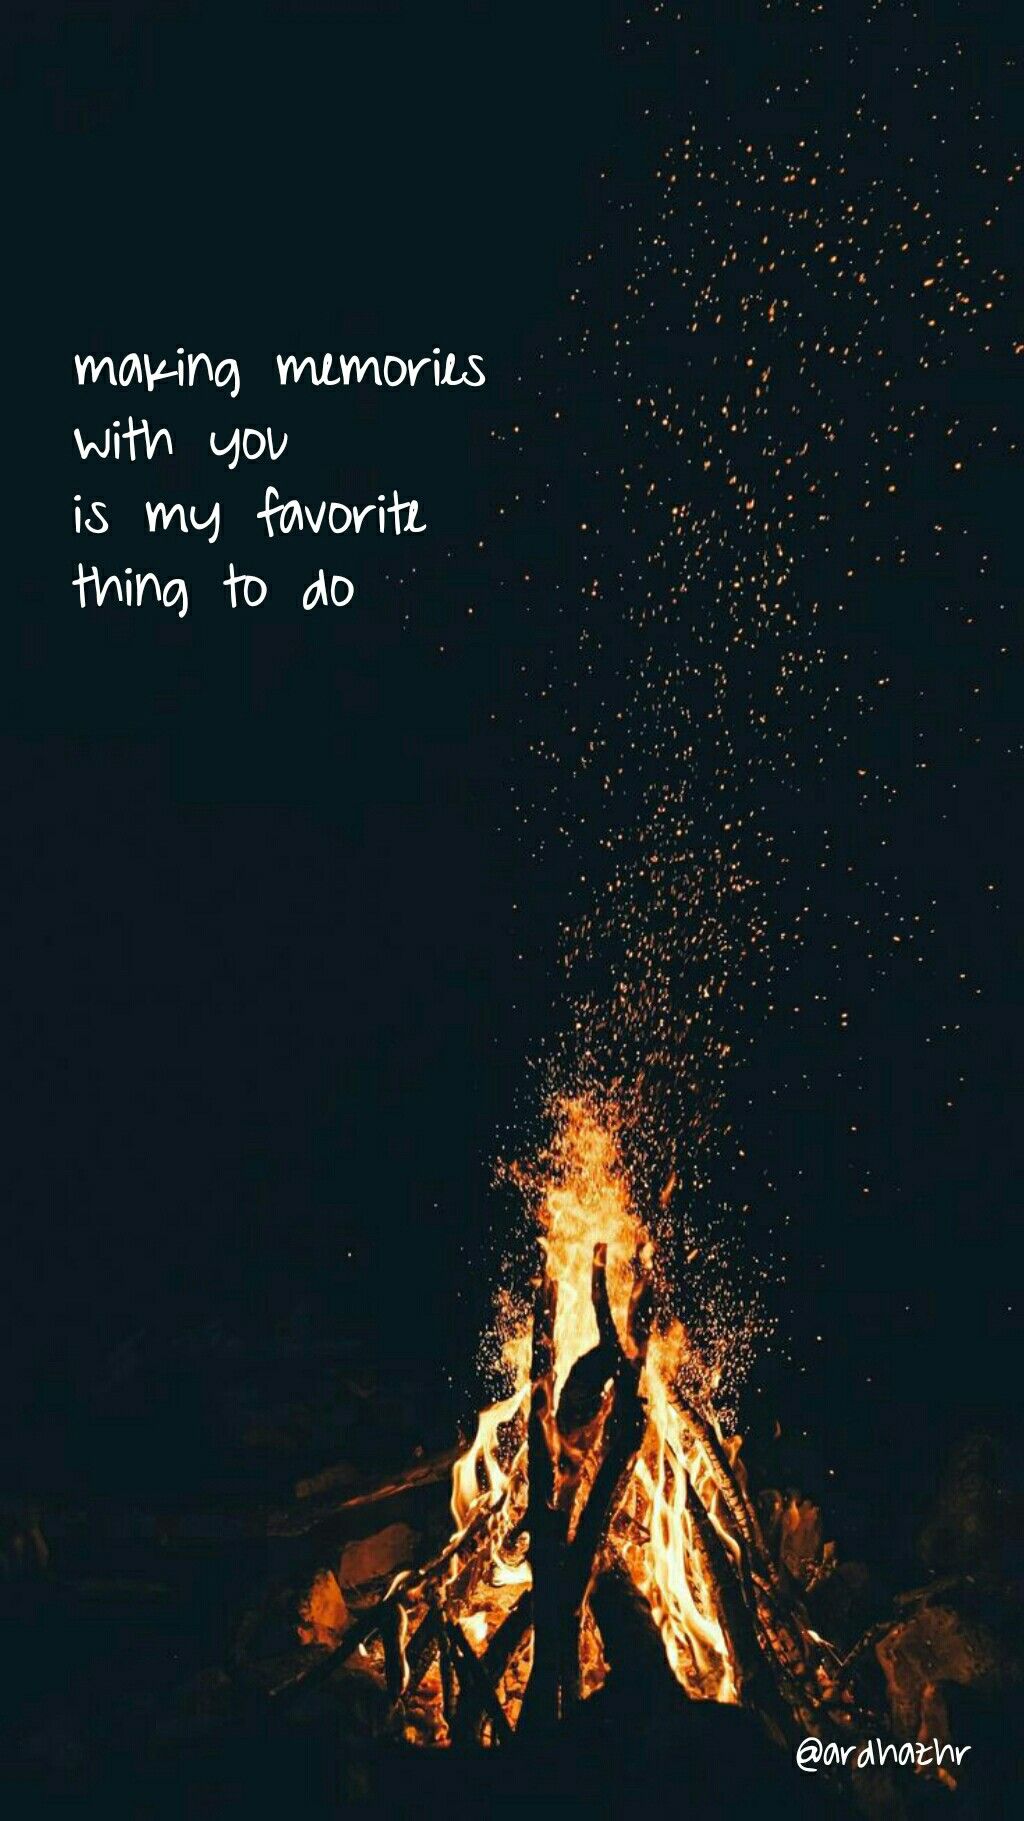 Best Friend Quotes Wallpaper Android Best Wallpaper Ever 3223227 Hd Wallpaper Backgrounds Download Find and save images from the friendship aesthetic collection by isabel (eiisse) on we heart it, your everyday app to get lost in what you love. best friend quotes wallpaper android